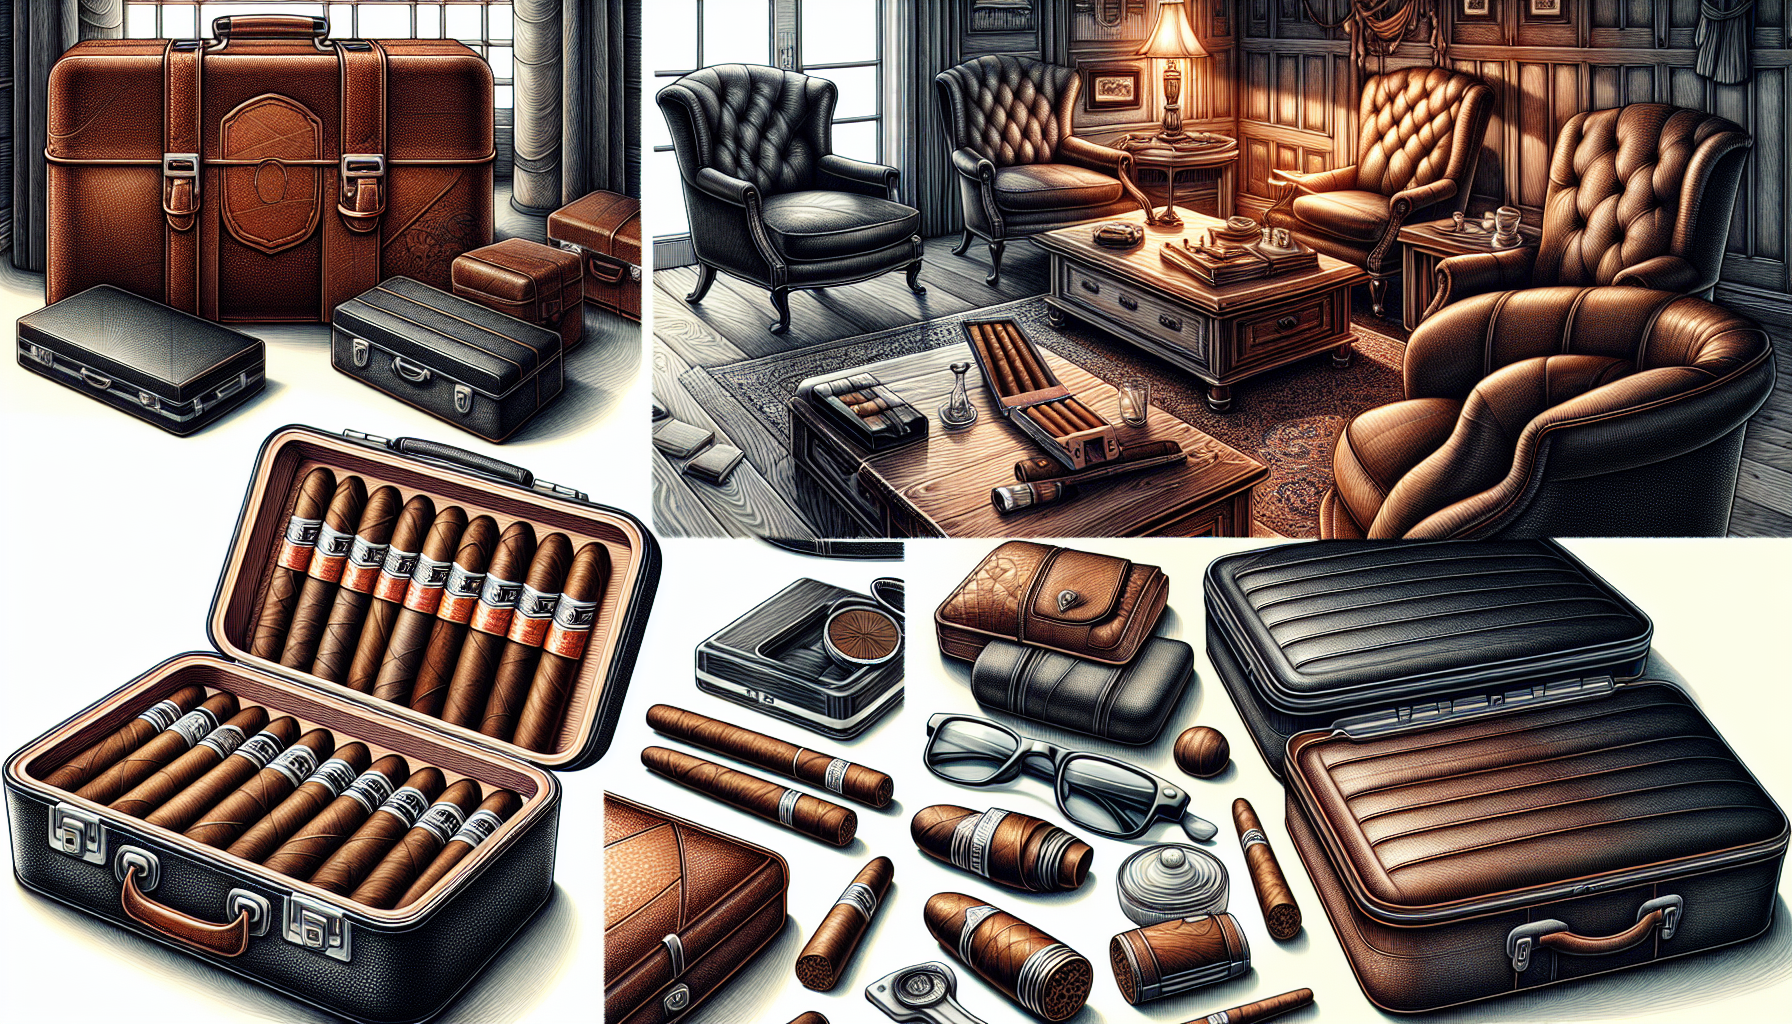 Travel cases and portable cigar storage for on-the-go convenience